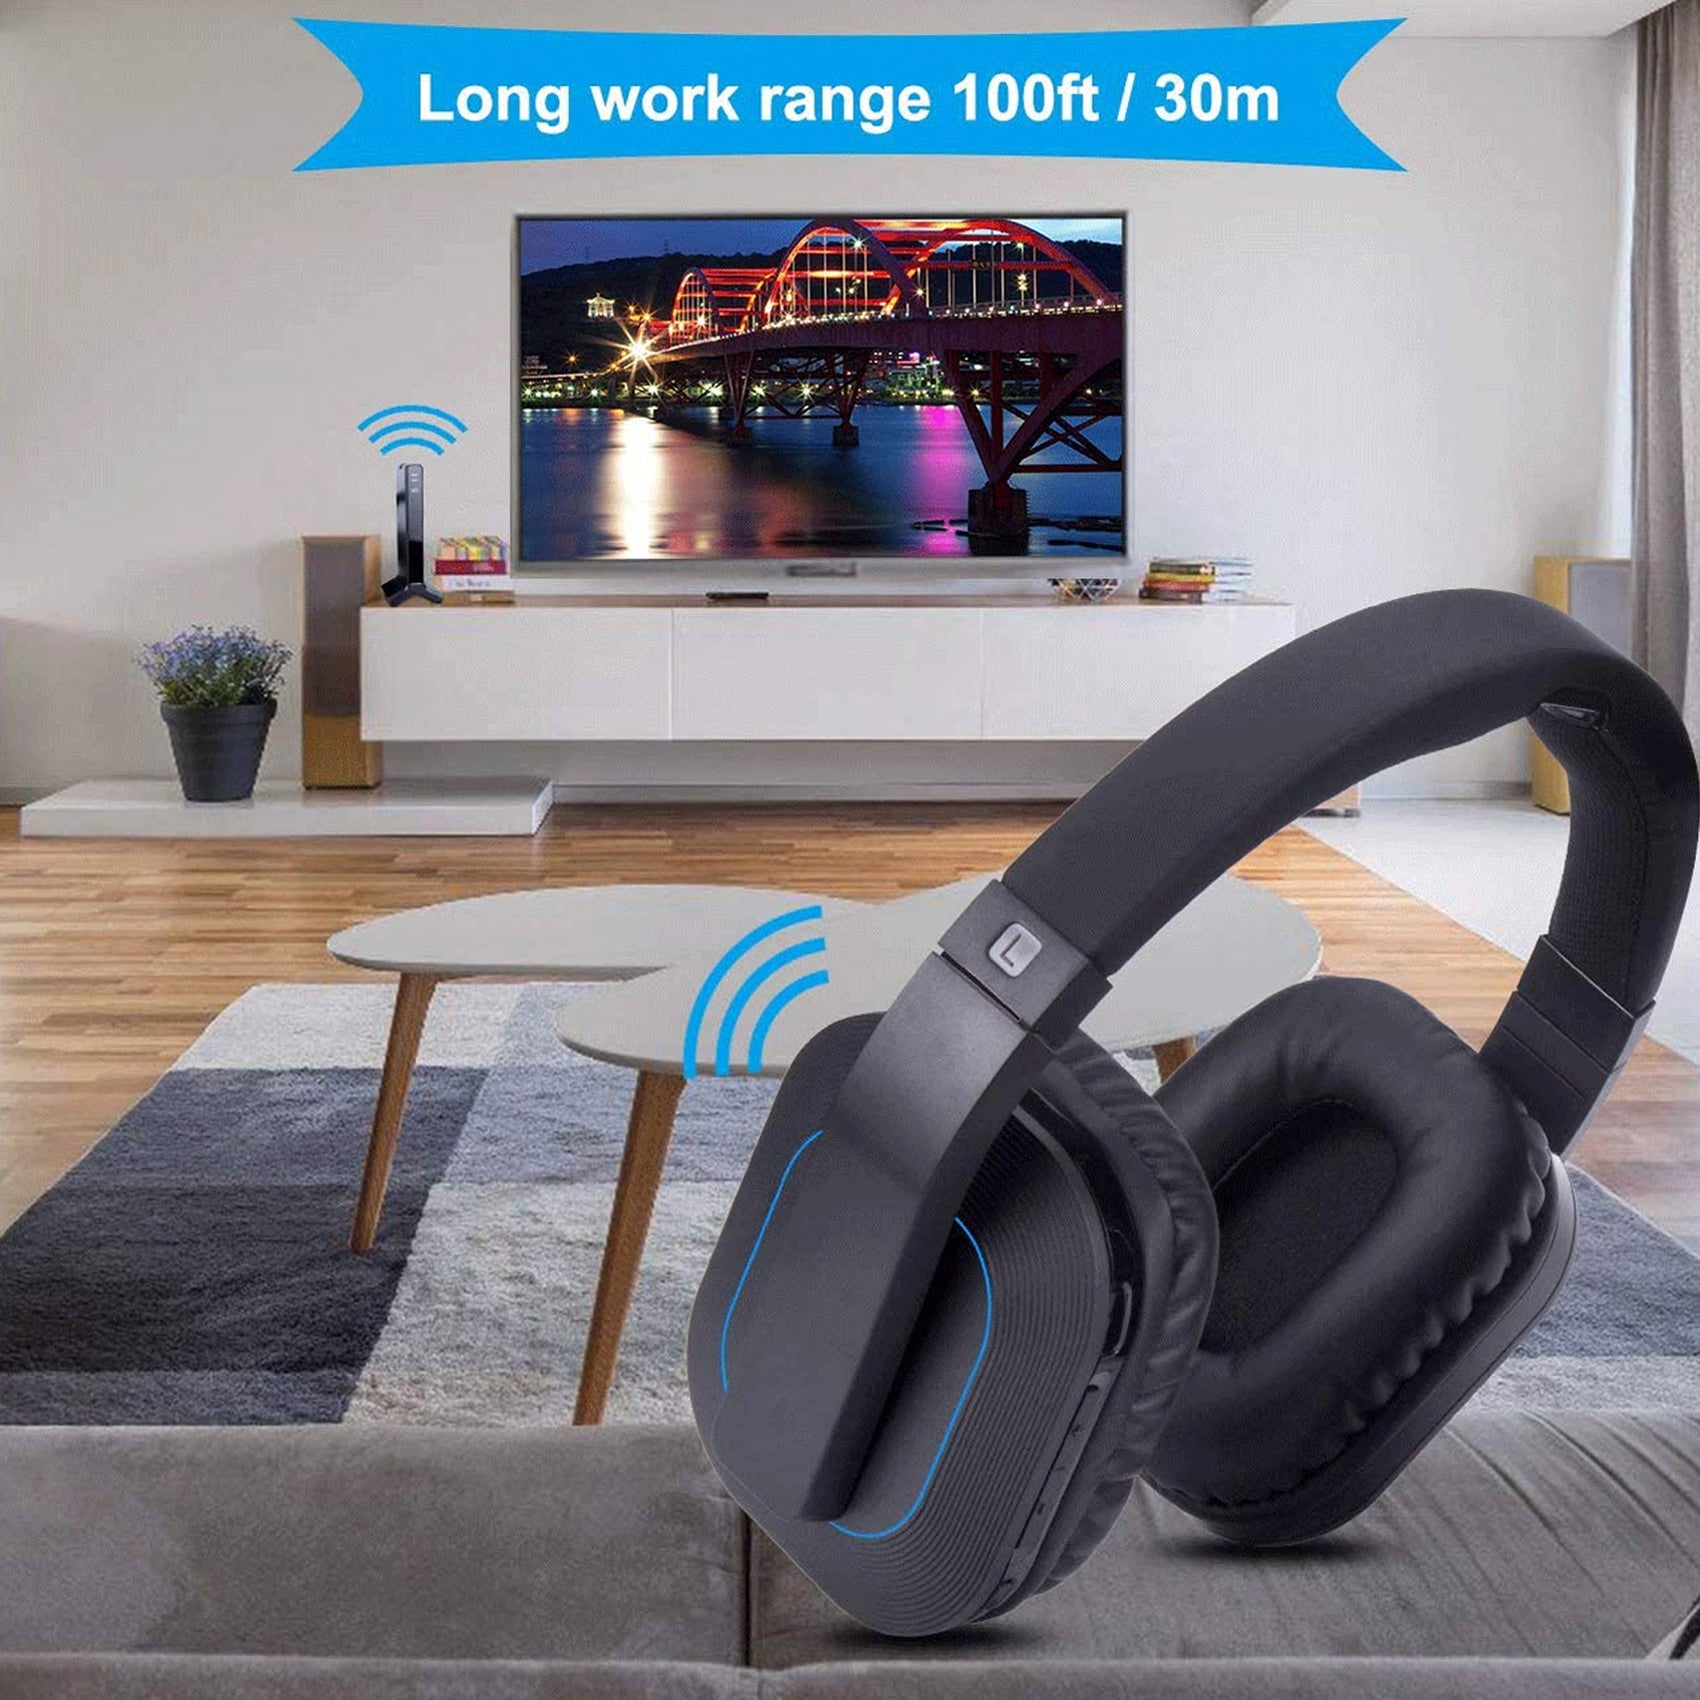 AS-D1 Wireless Headphones for Smart TV Watching with Transmitter Charging Dock, Digital Optical System, High Volume Headset Ideal for Seniors/Hearing Impaired, 100 Foot Wireless Range No Audio Delay